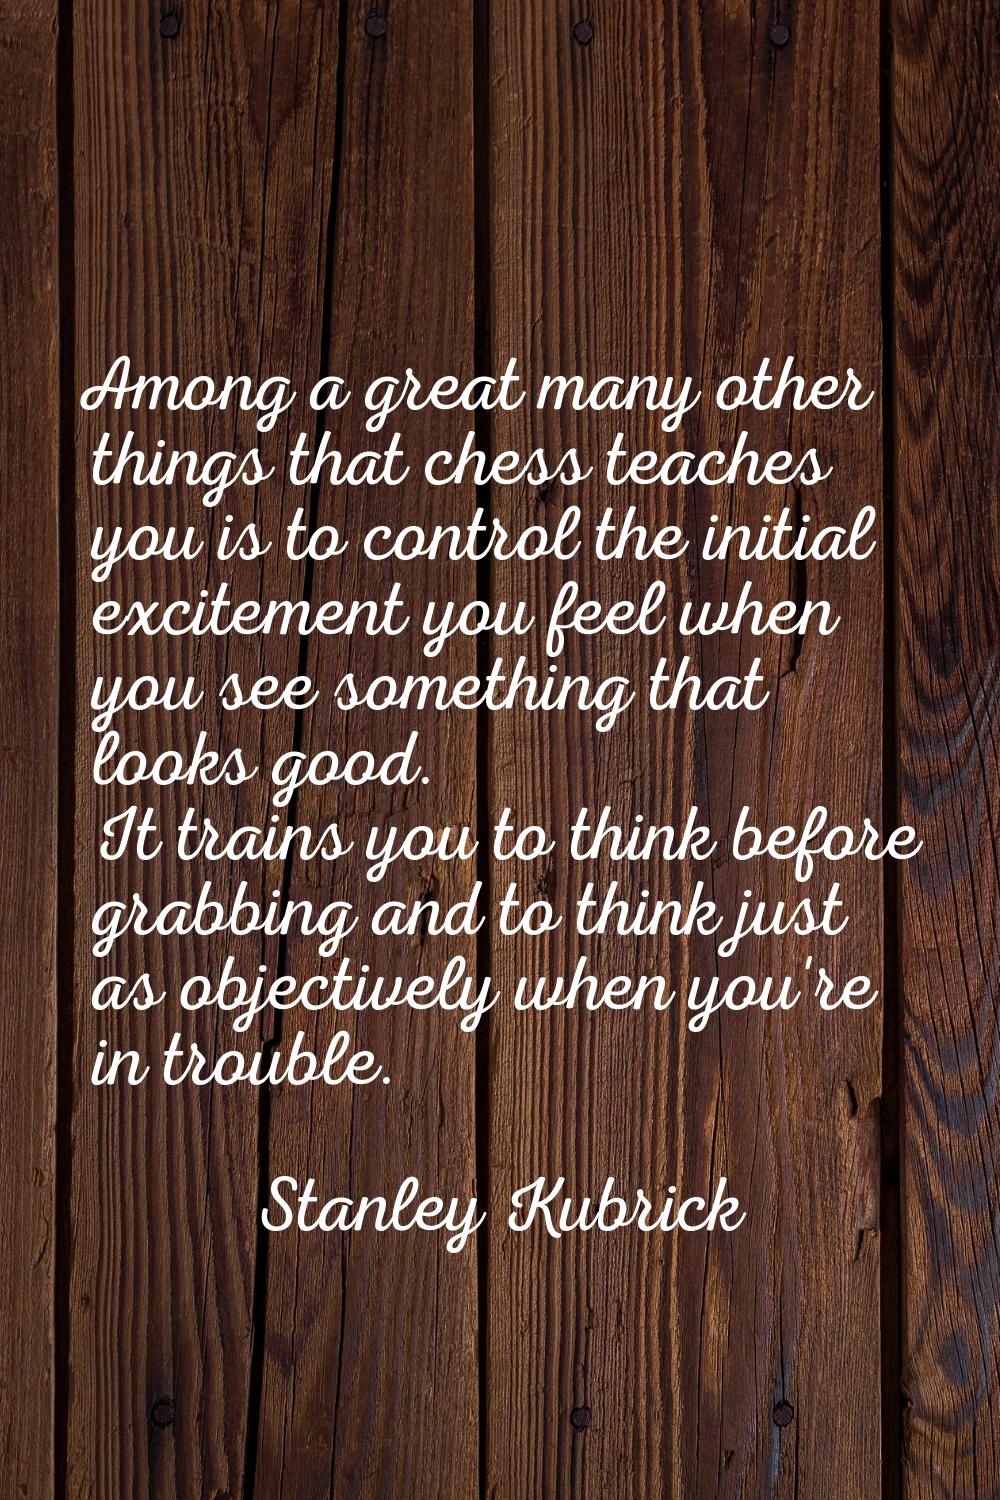 Among a great many other things that chess teaches you is to control the initial excitement you fee